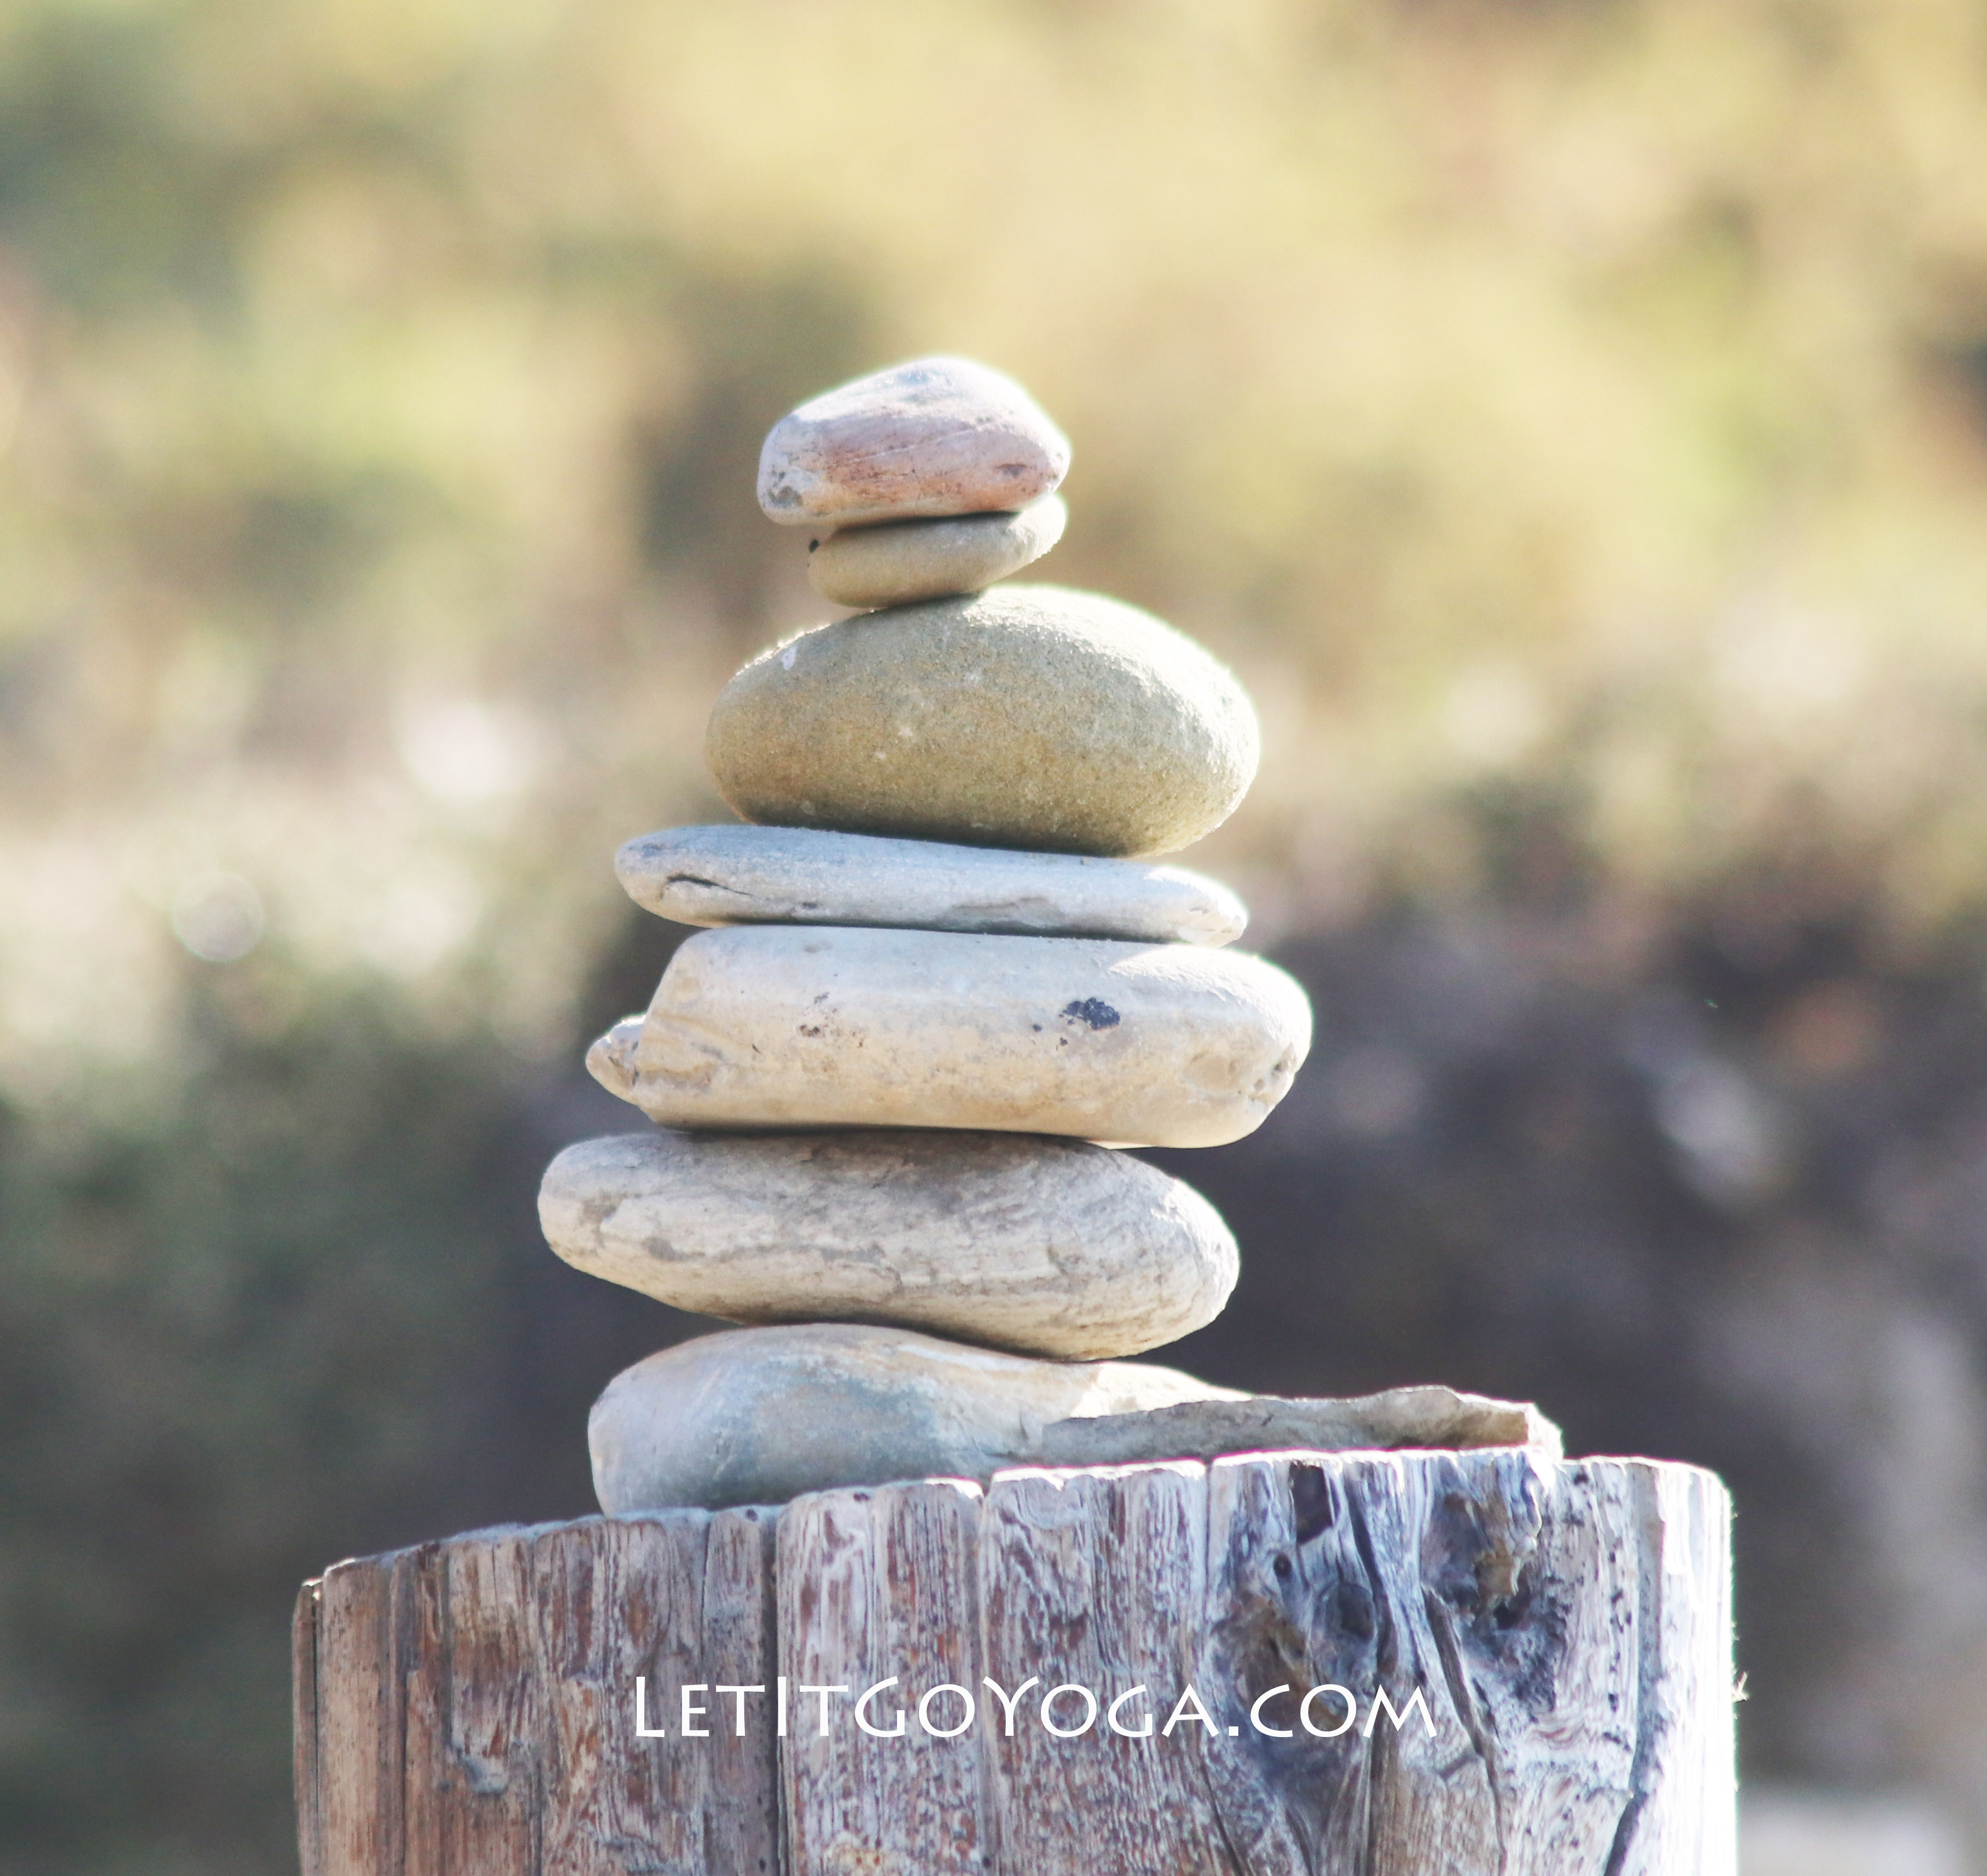 Looking for Balance? – Let It Go Yoga